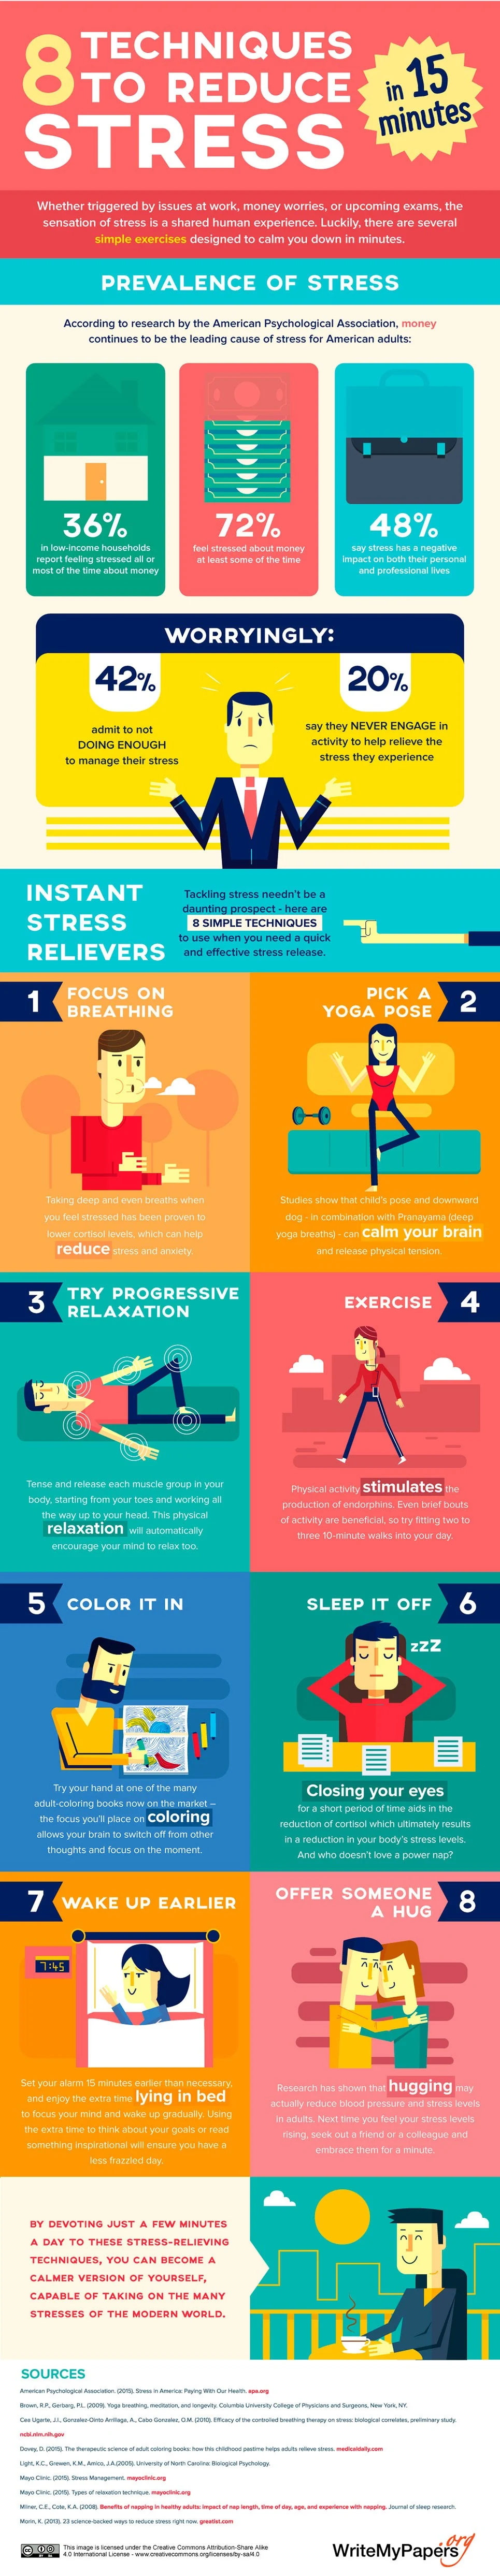 8 Techniques To Reduce Stress In 15 Minutes - #infographic